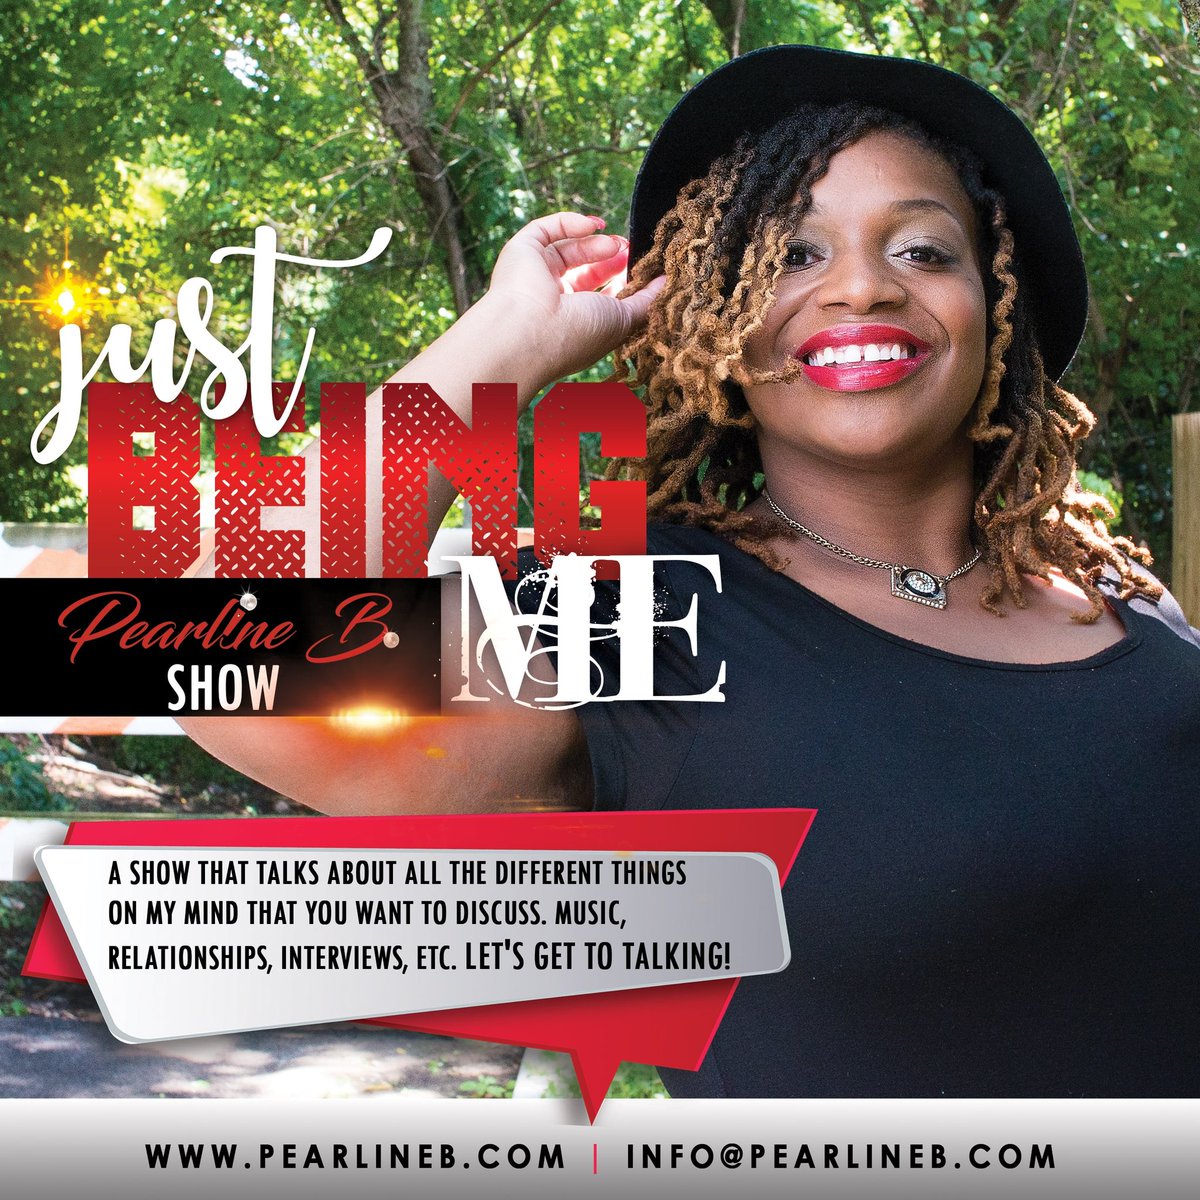 TOMORROW IS THE DAY!!!!!

Tomorrow is Mother's Day AND my re-premier of my show, JUST BEING ME PEARLINE B. SHOW! It will be premiering on Spotify! I am super duper excited! 

#spotifyforpodcasters #spotify #podcast #podcaster #onairpersonality #radio #justbeingmepearlinebshow